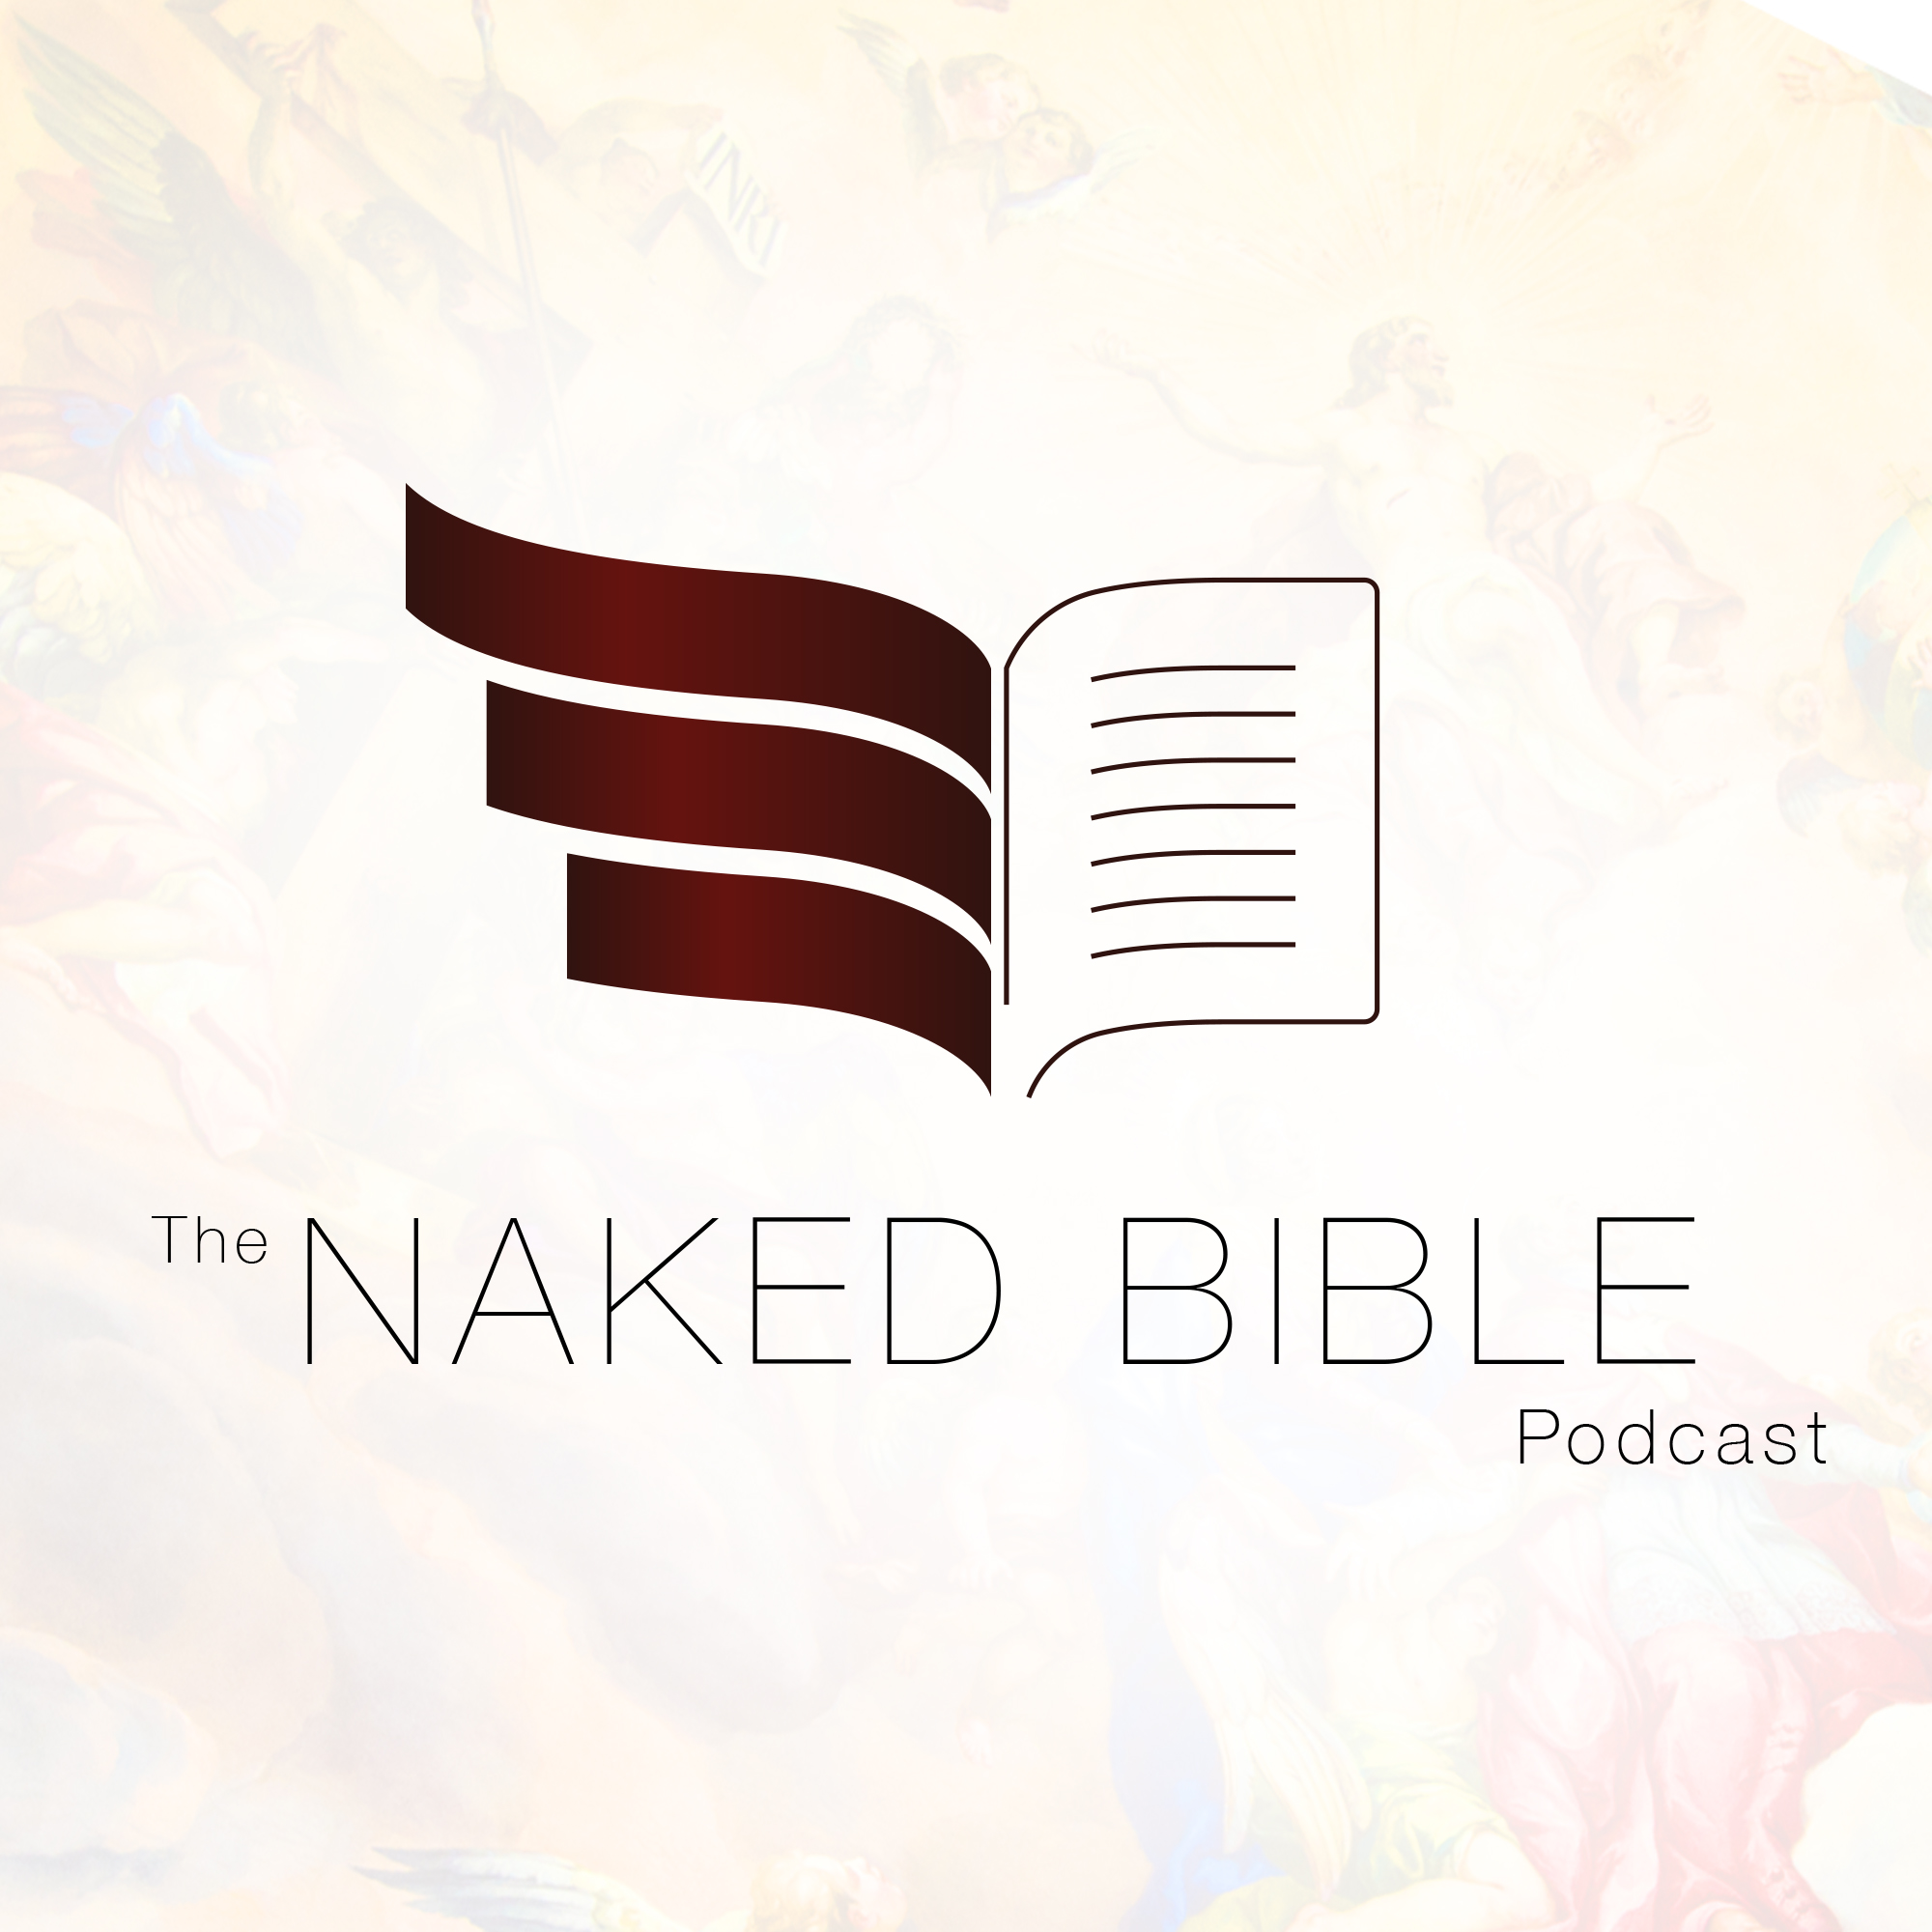 The Naked Bible Podcast podcast